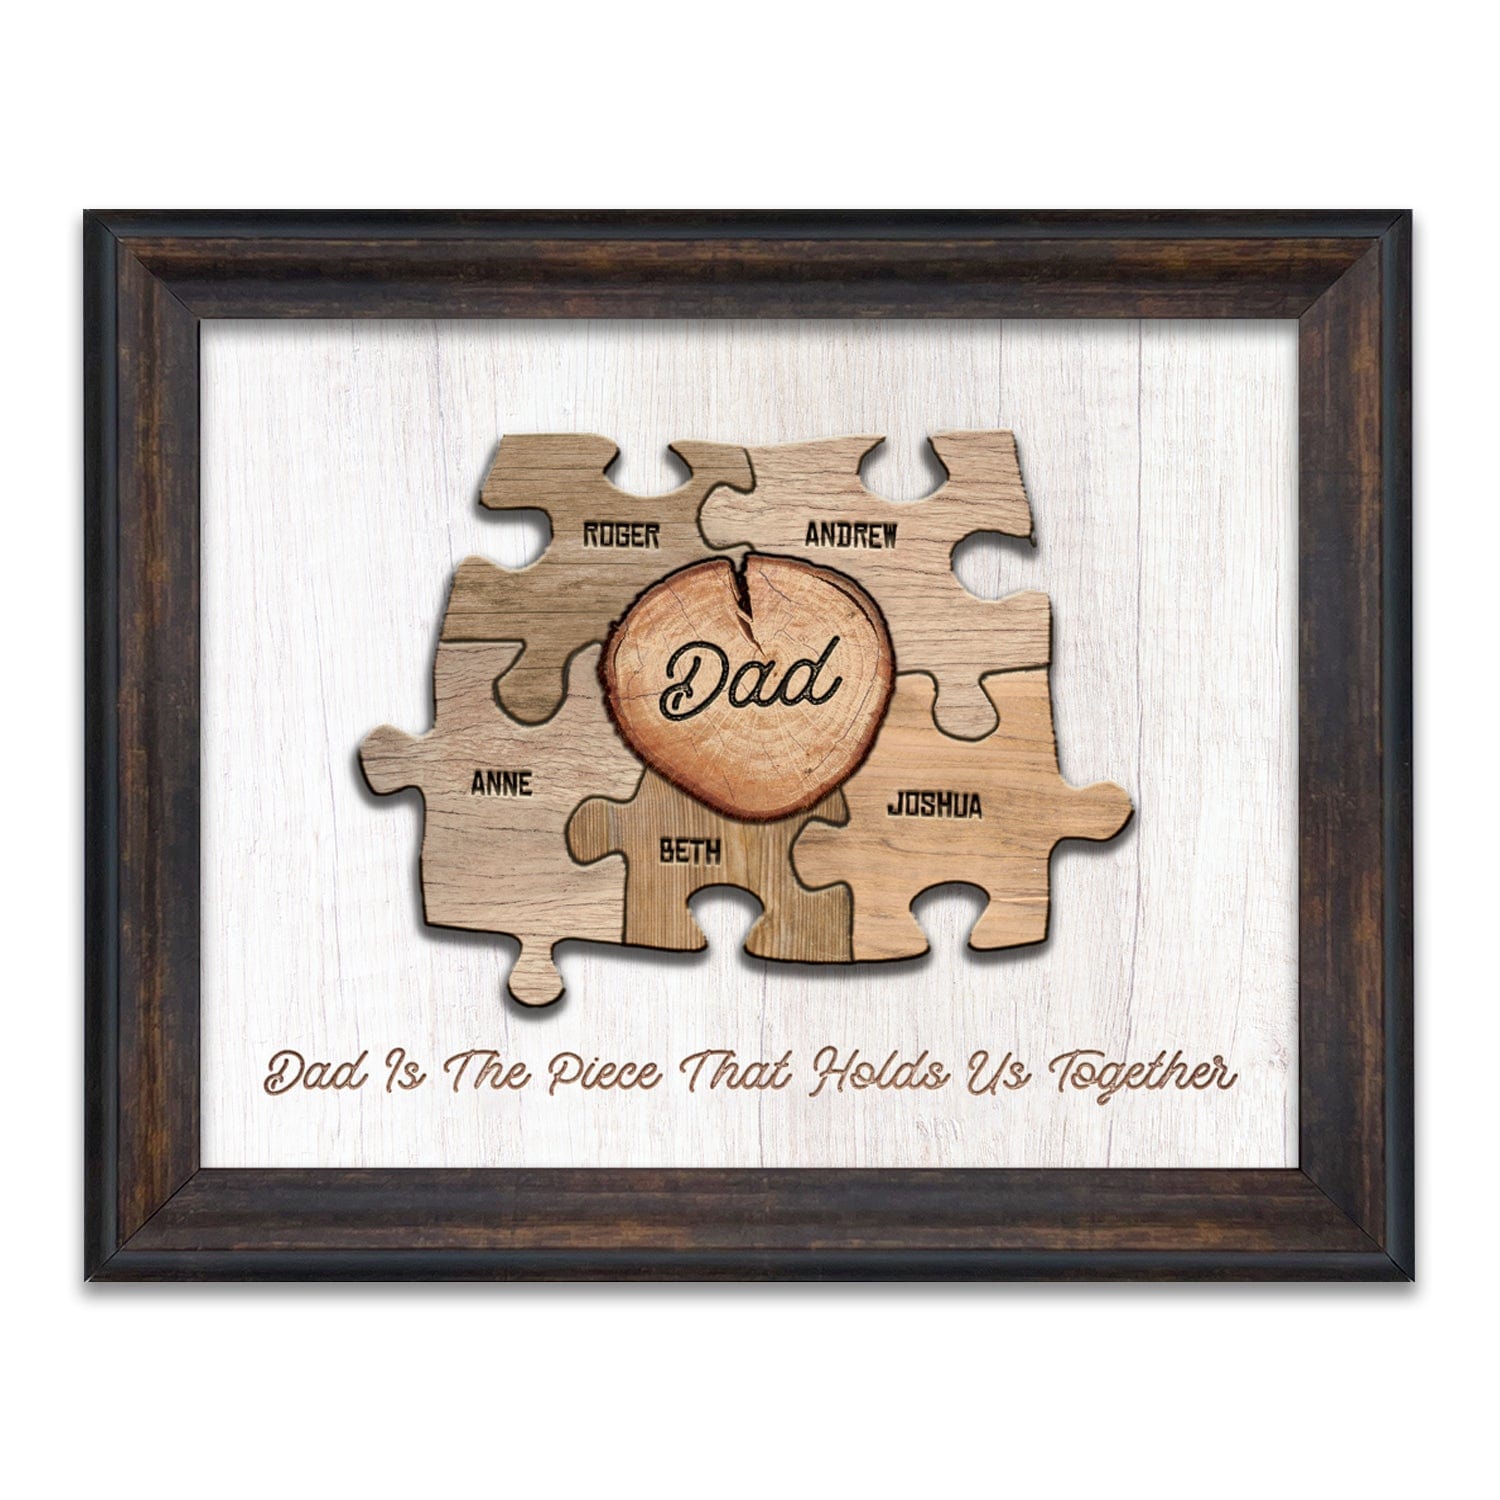 Personalized Gift for dad puzzle piece art framed under glass